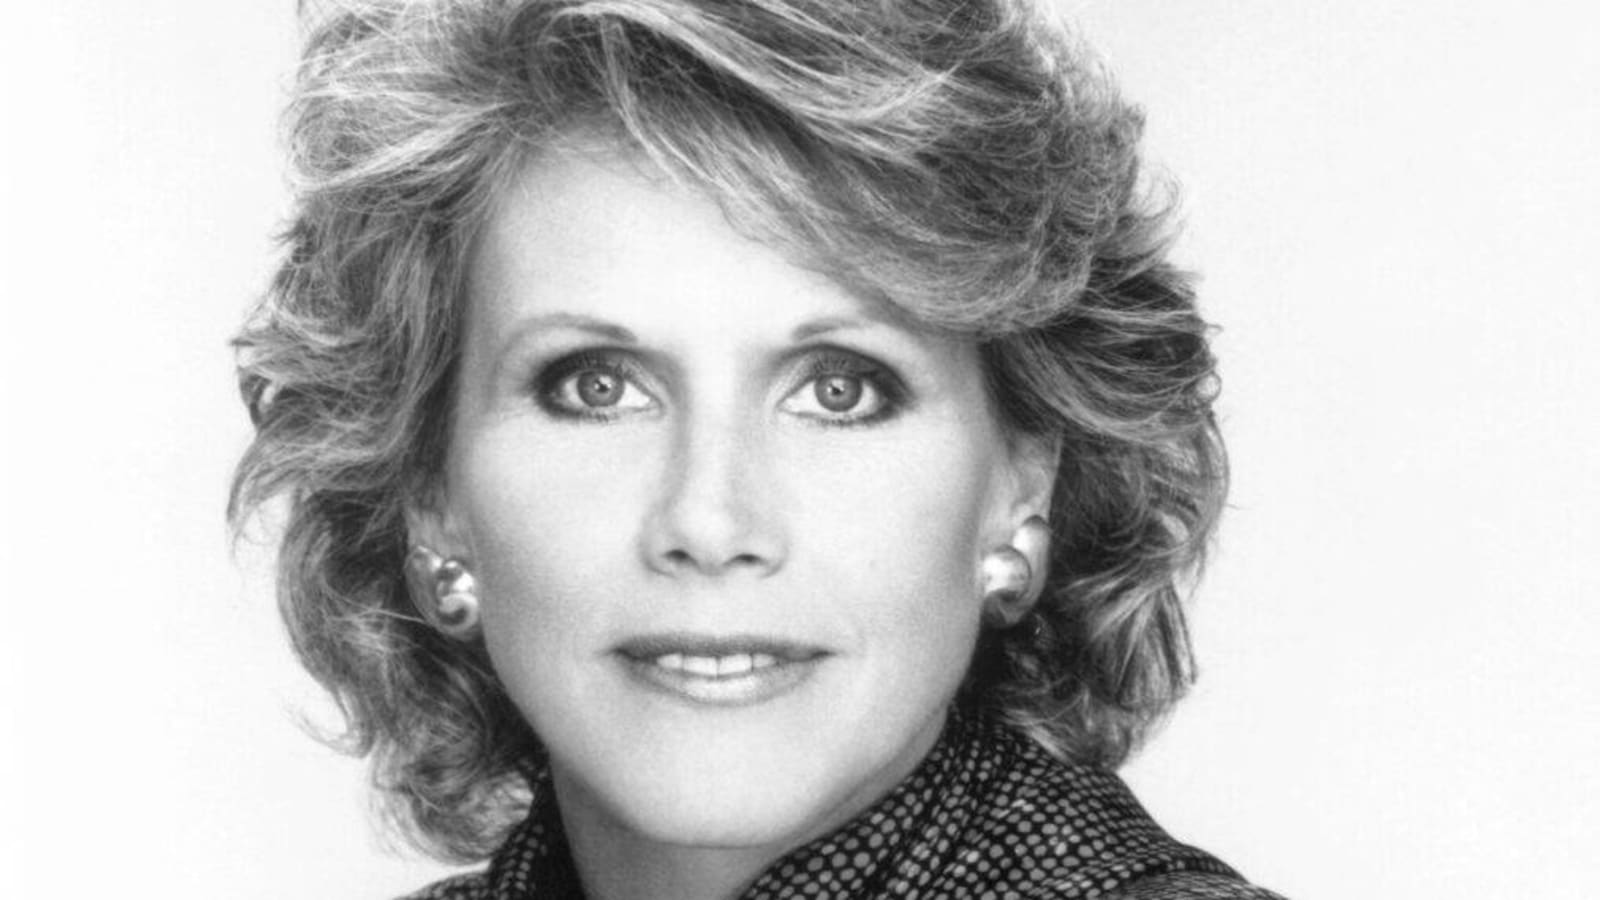 Shannon Wilcox, ‘Dallas’ Actress and ‘Buck James’ Star, Dies at 80